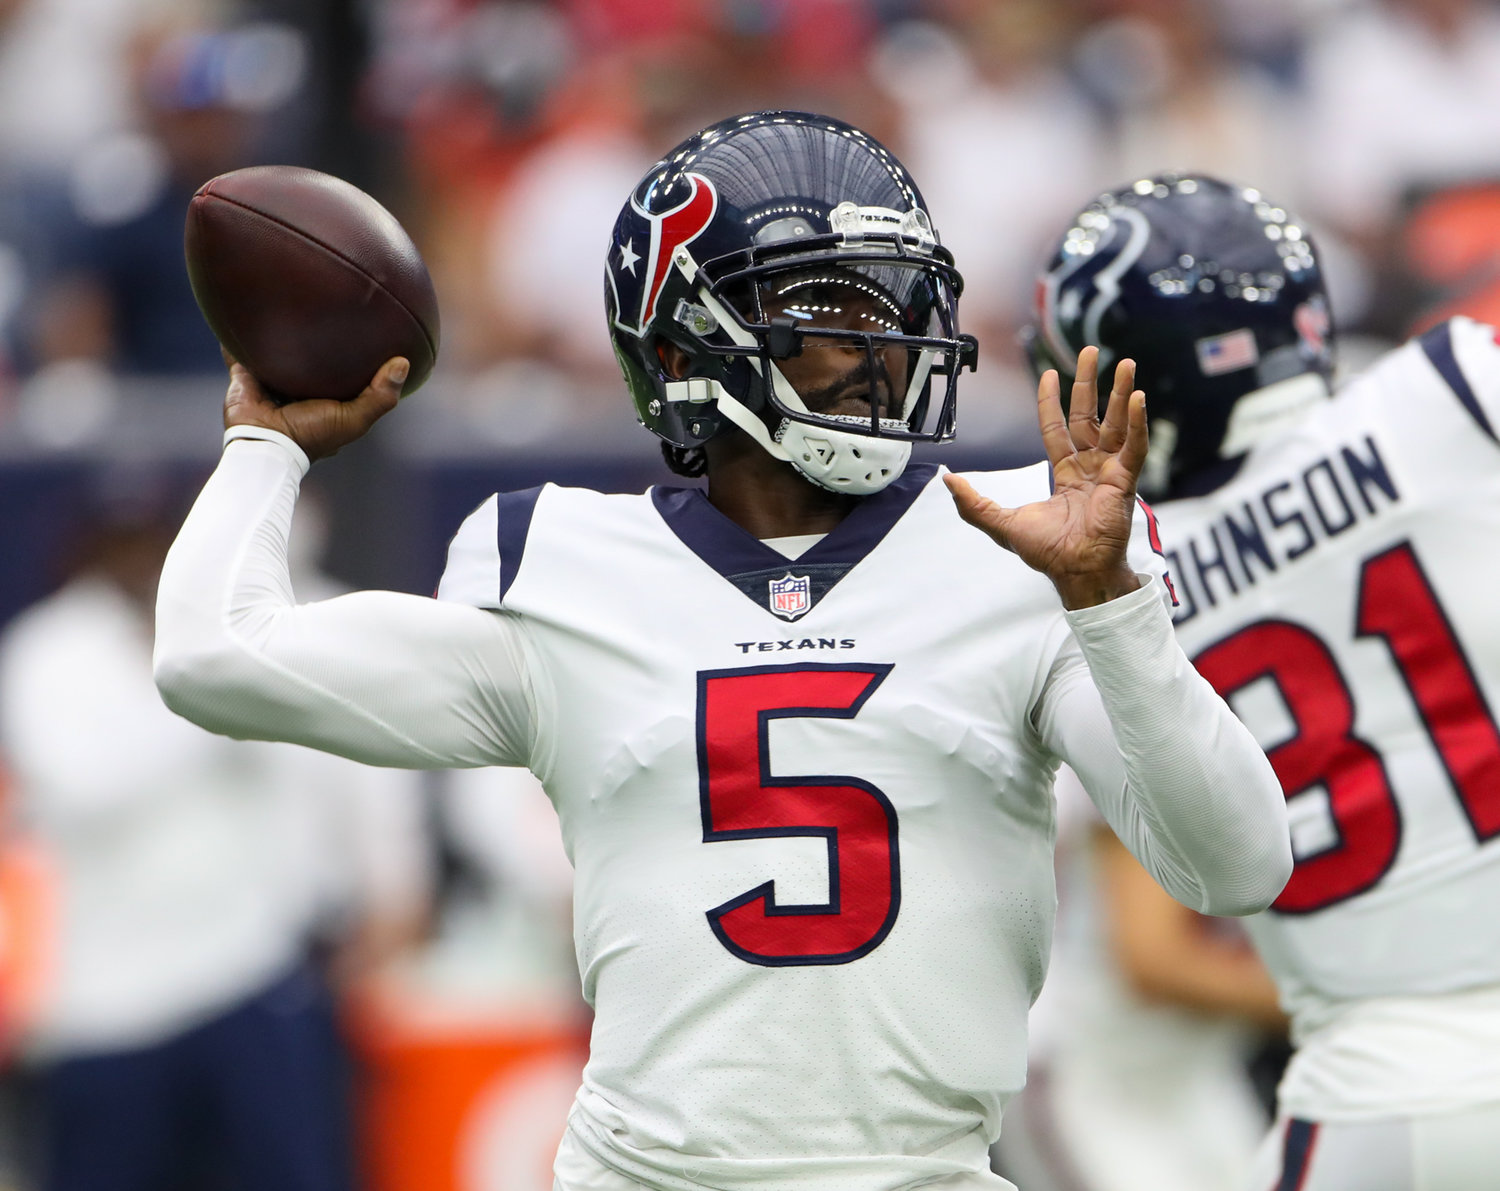 Houston Texans quarterback Tyrod Taylor (5) passes the ball during the first half of an NFL game between the Houston Texans and the Jacksonville Jaguars on September 12, 2021 in Houston, Texas.